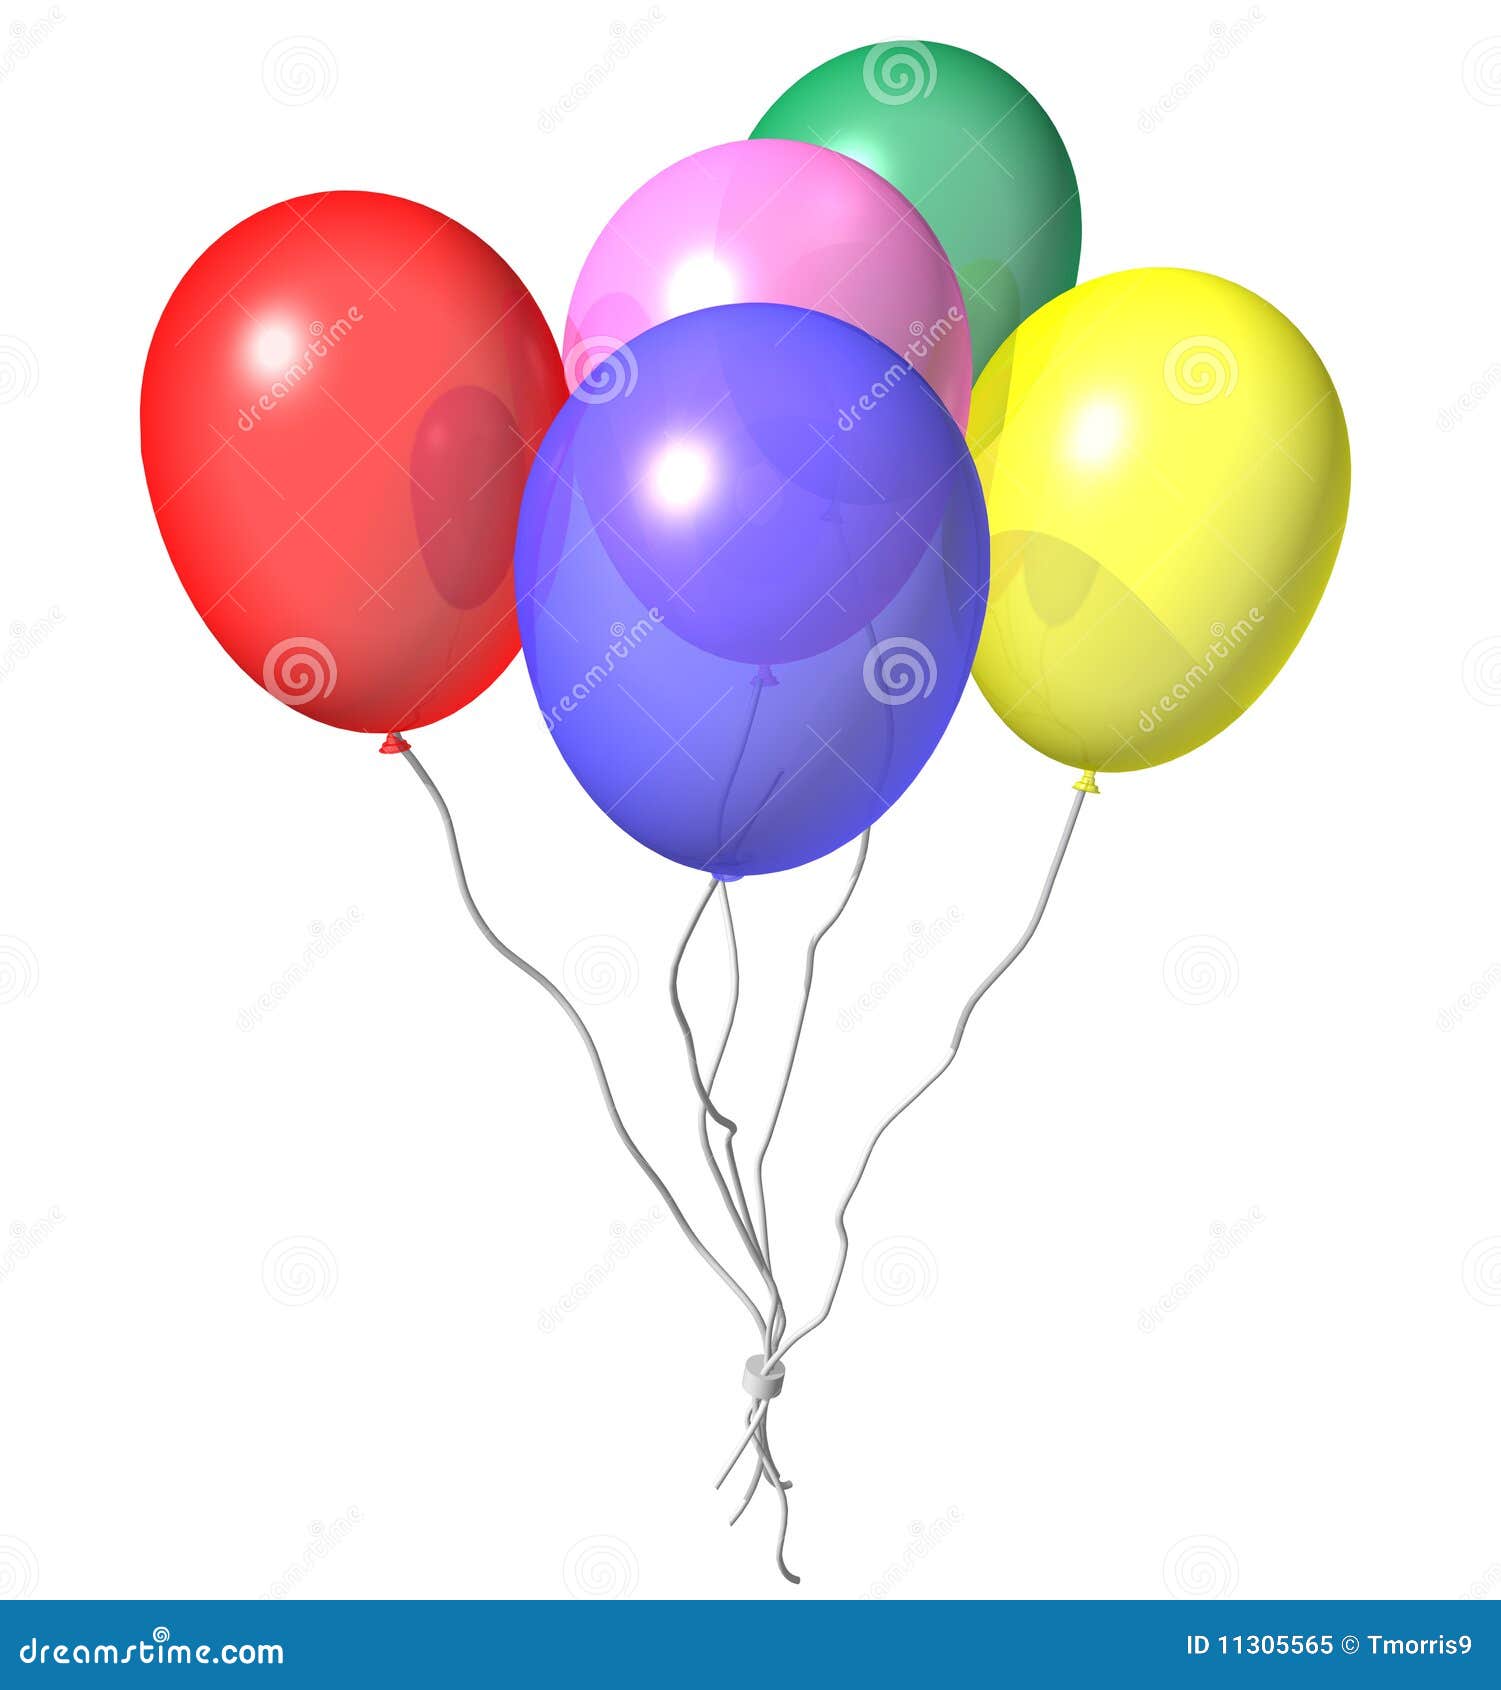 http://thumbs.dreamstime.com/z/party-balloons-11305565.jpg